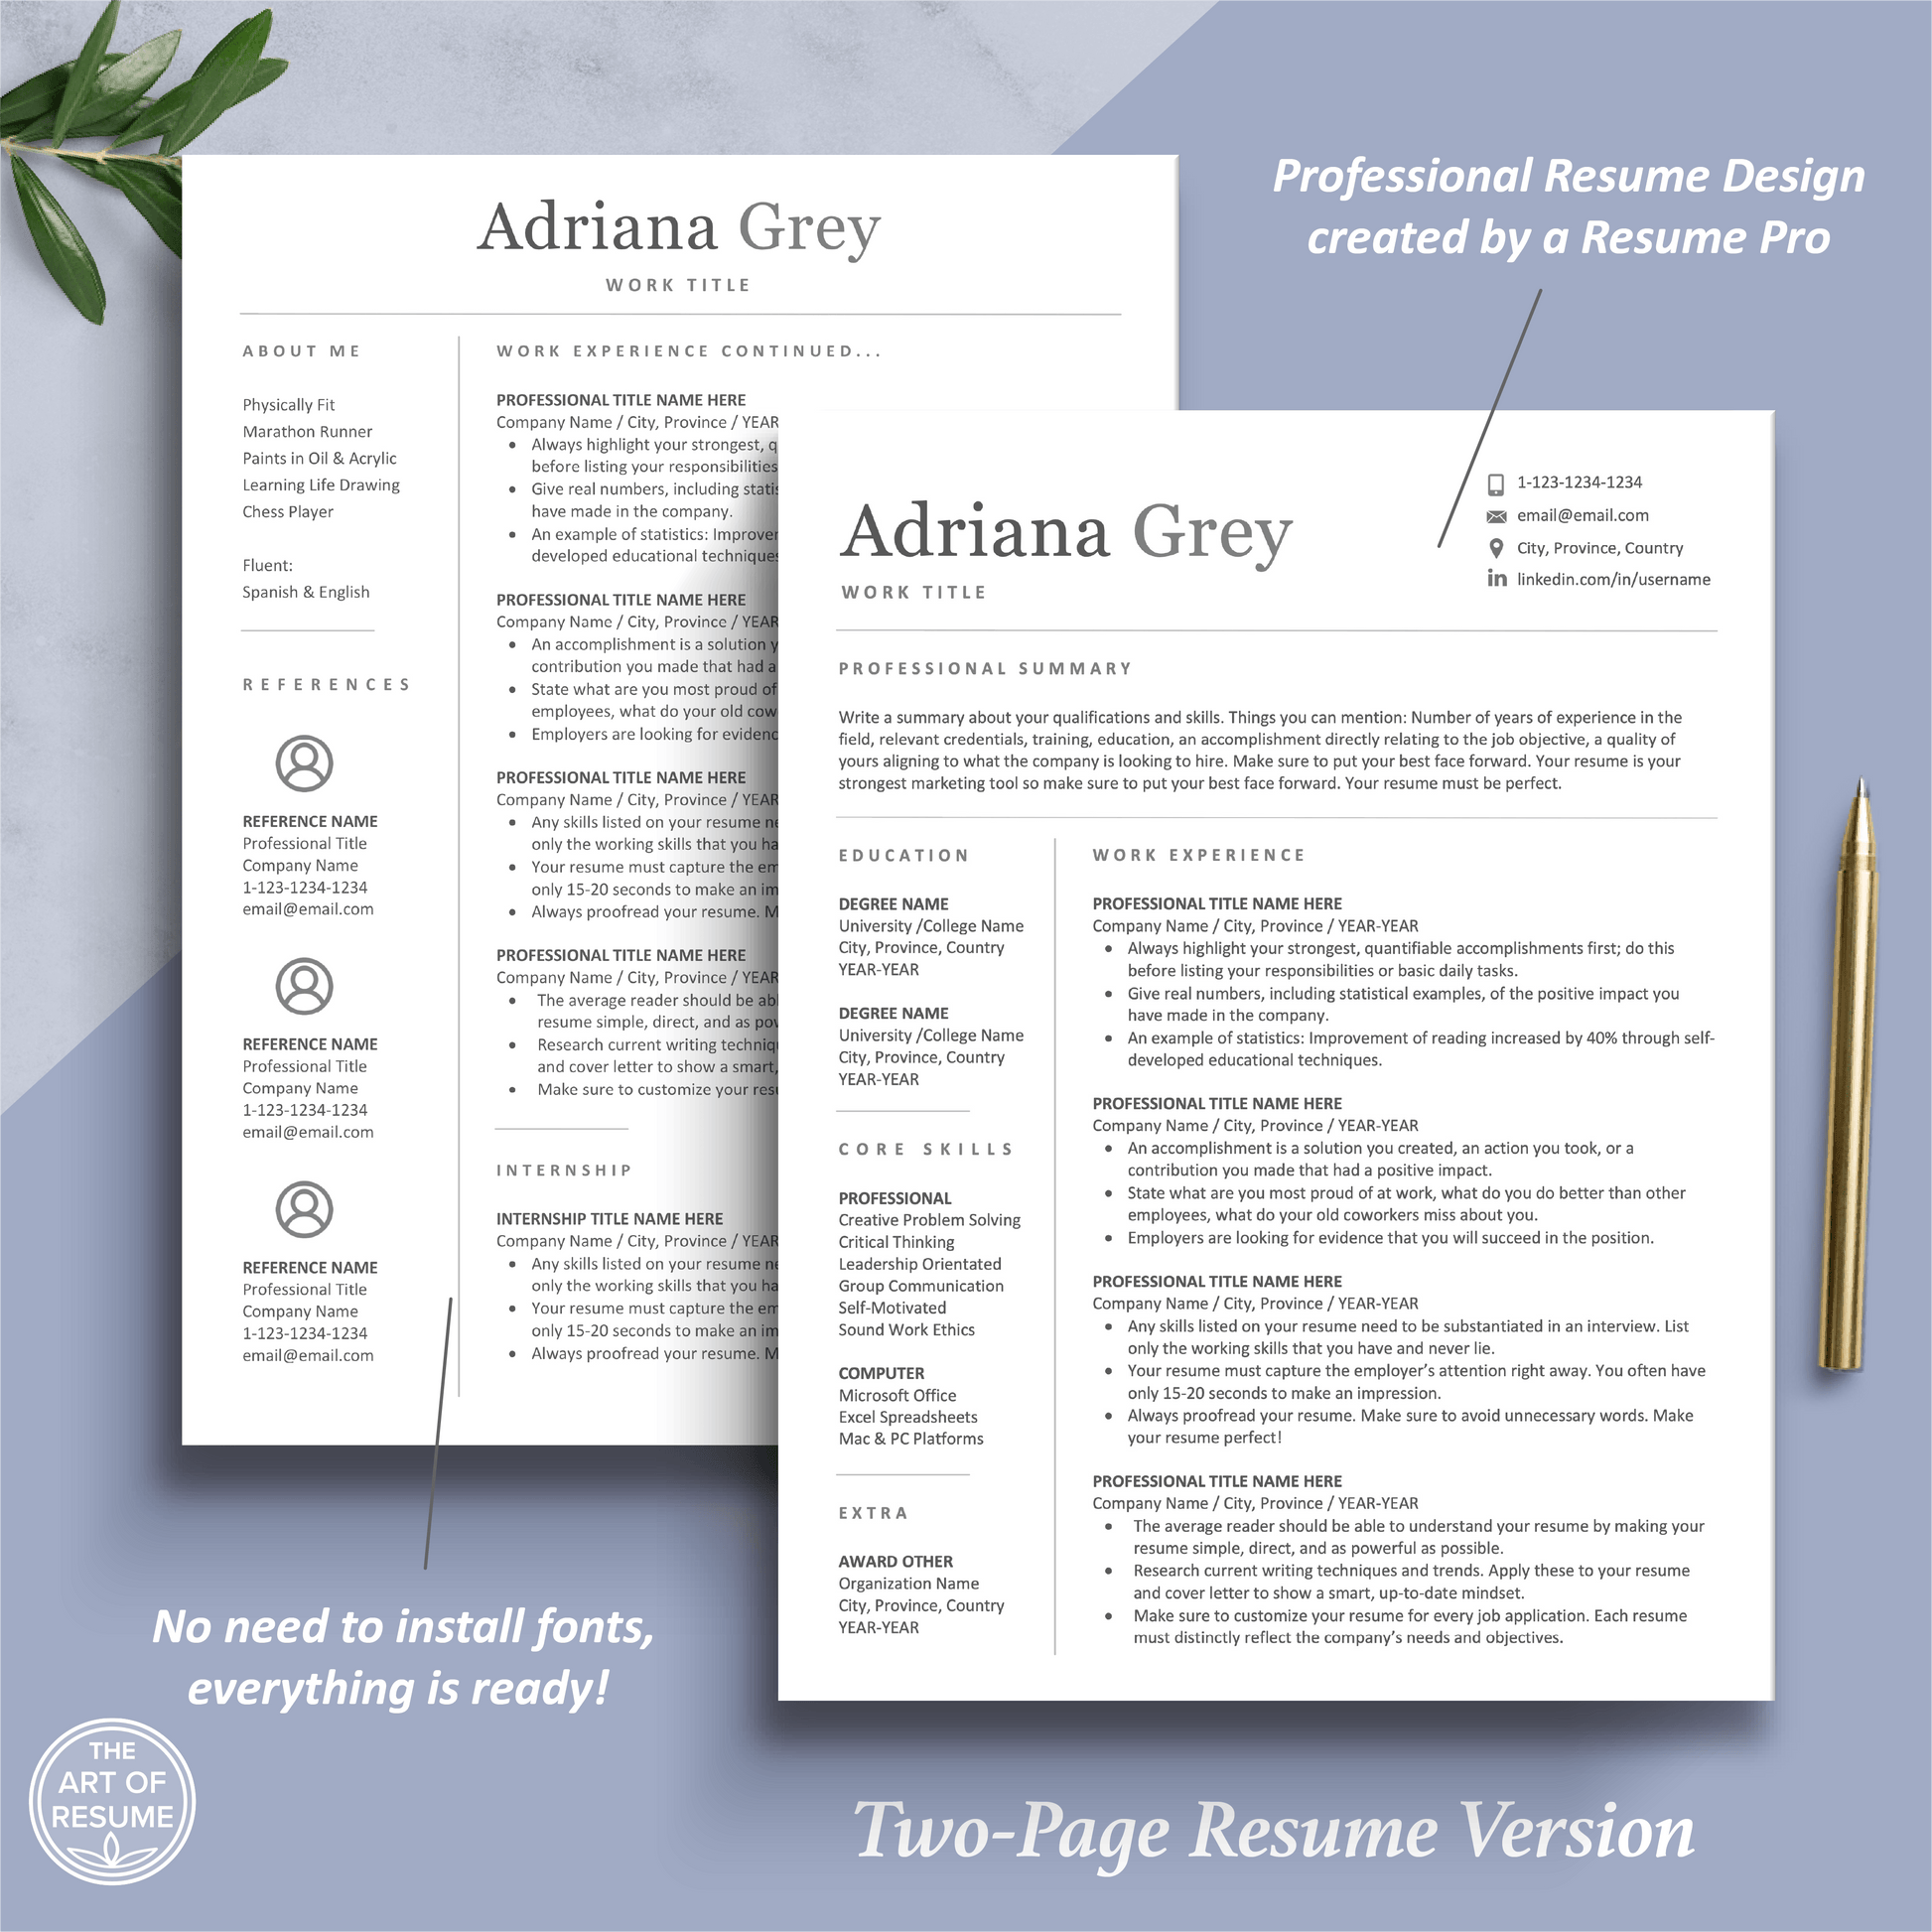 The Art of Resume Templates | Two-Page Modern Executive Resume CV Design Template Builder Maker | Curriculum Vitae